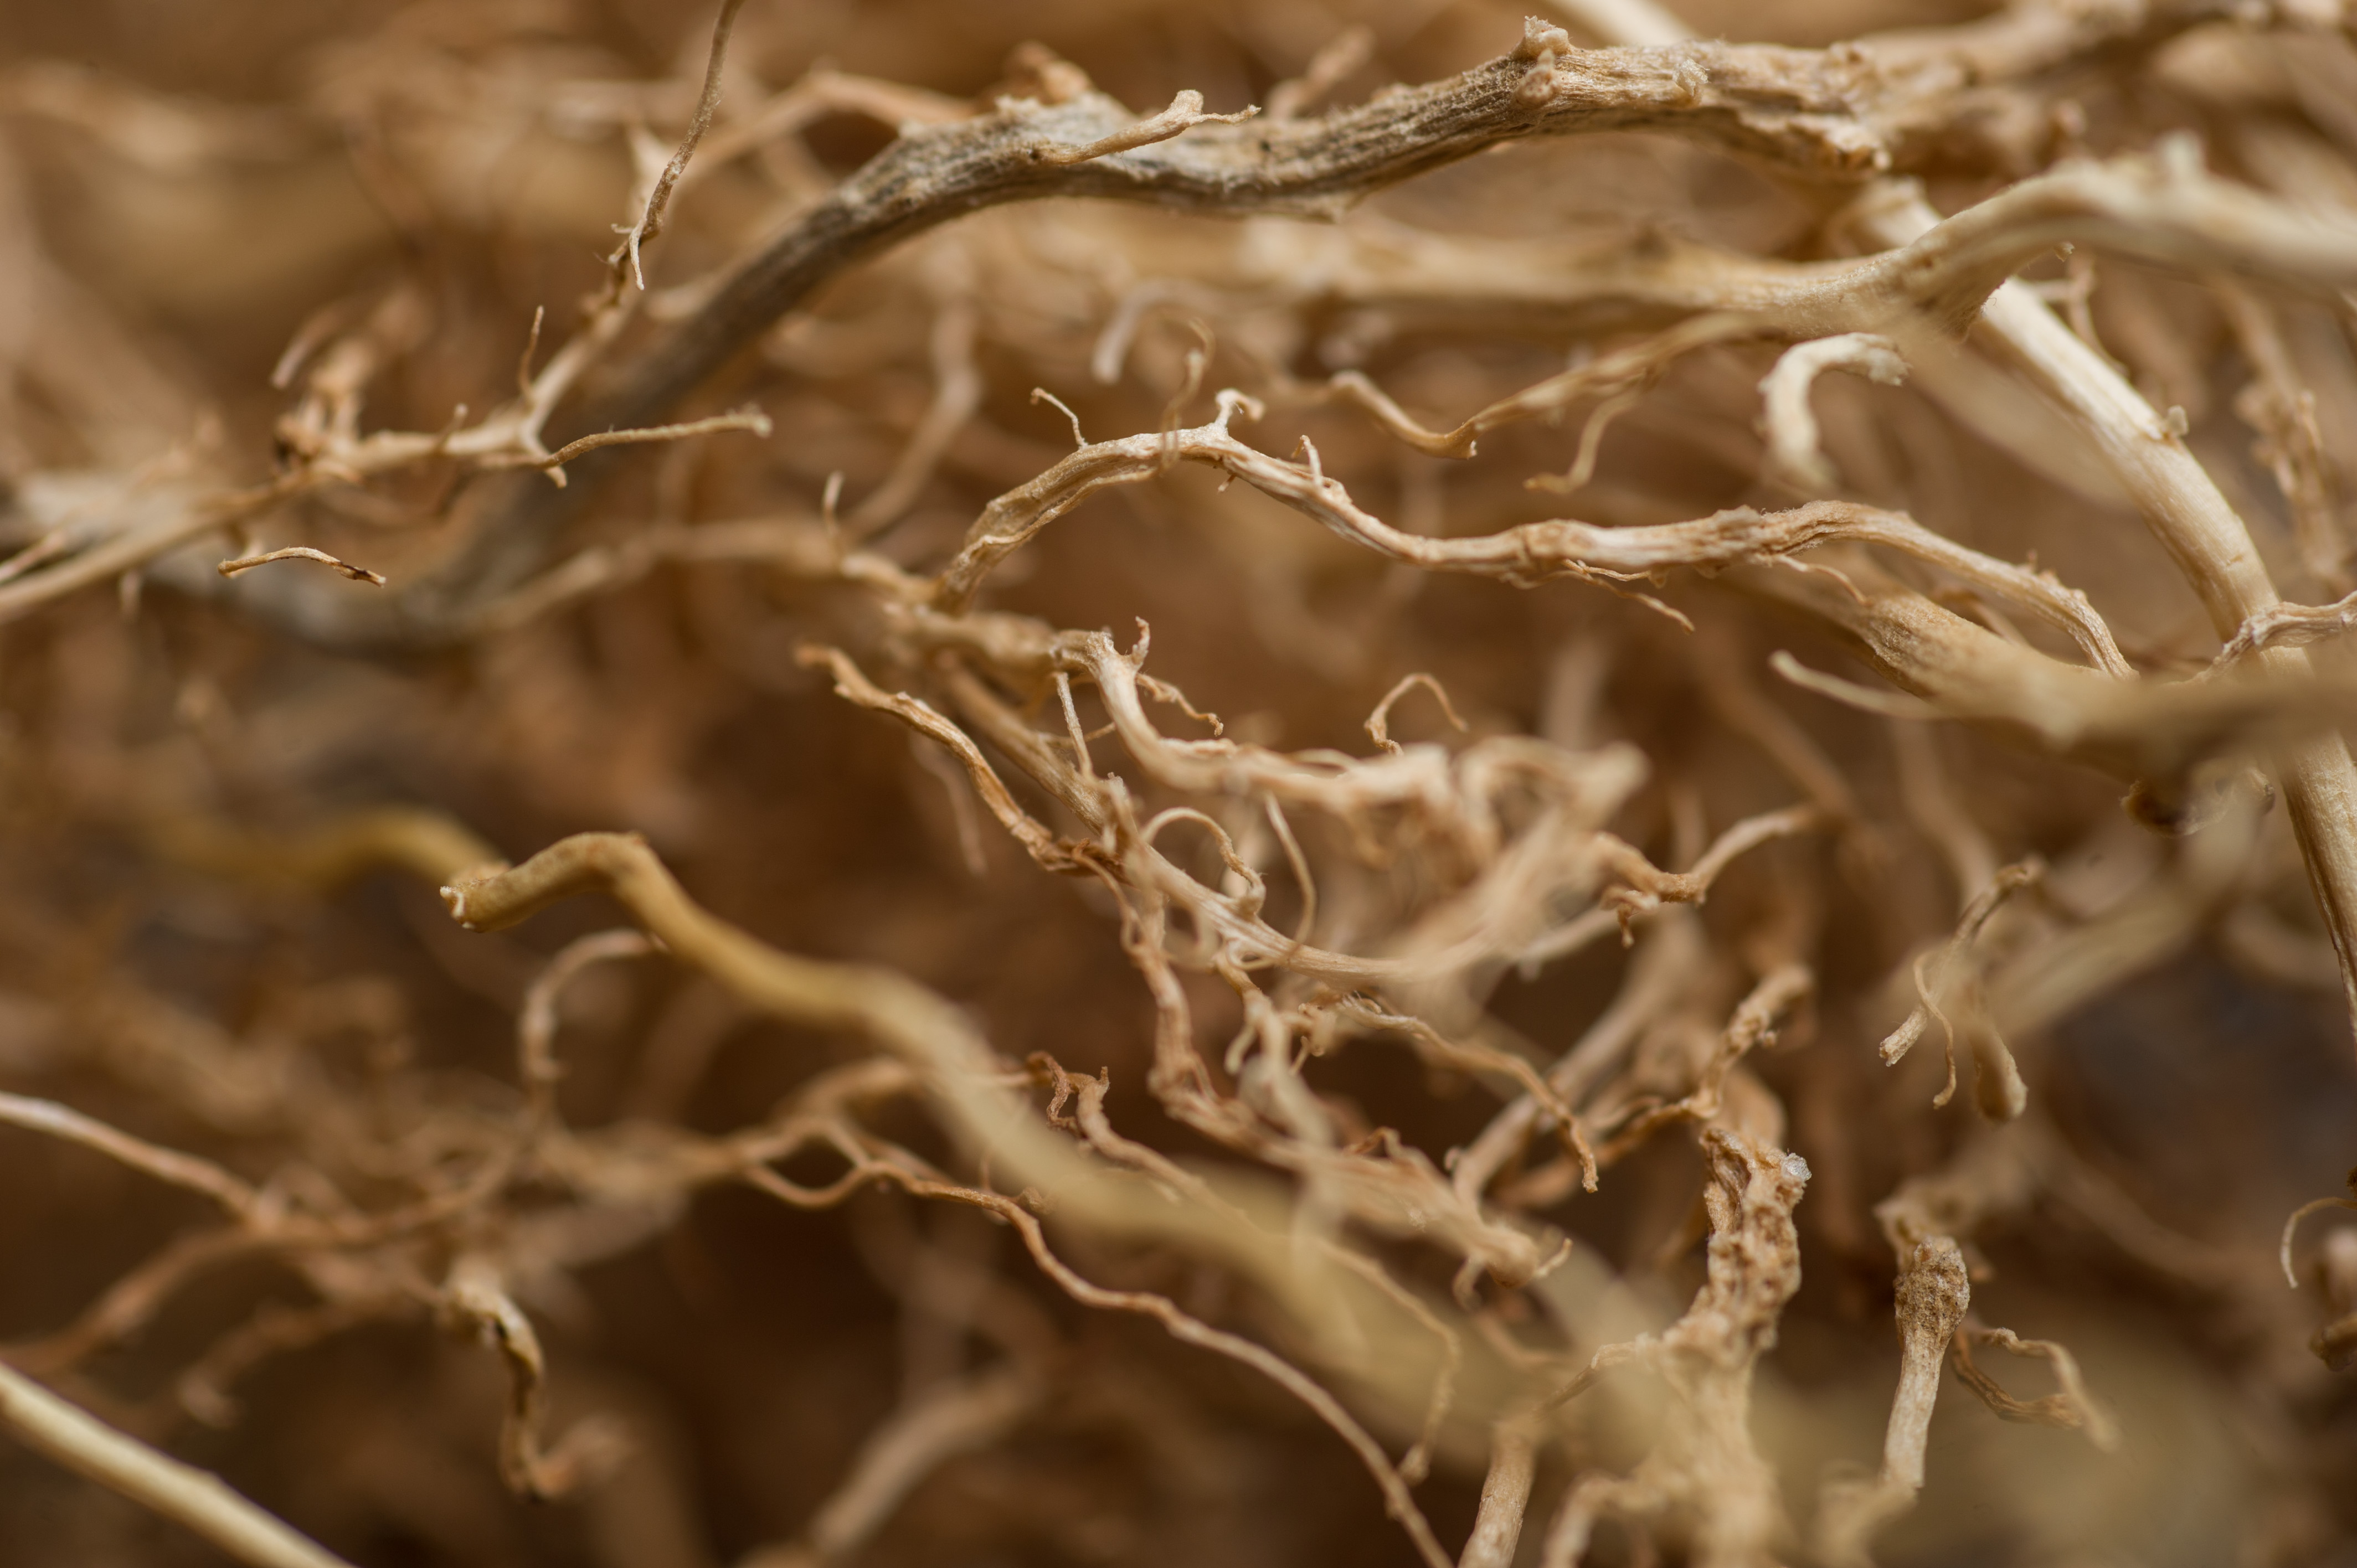 Close-up image shows the dried root system of a maize plant. (Credit: Rob Felt)